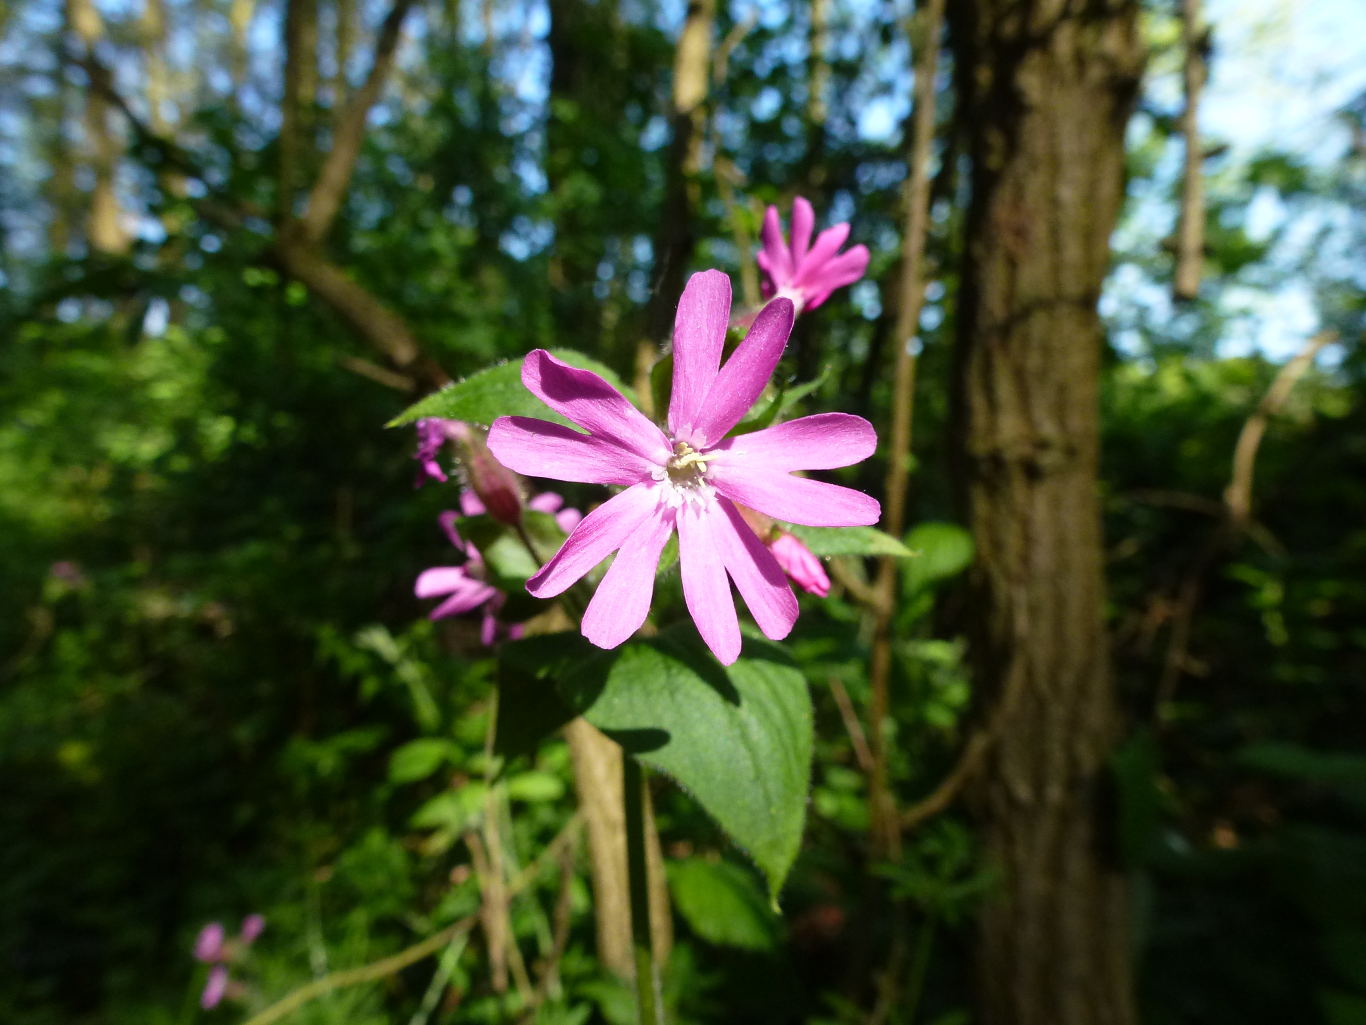 Red Campion growing in a woodland environment.